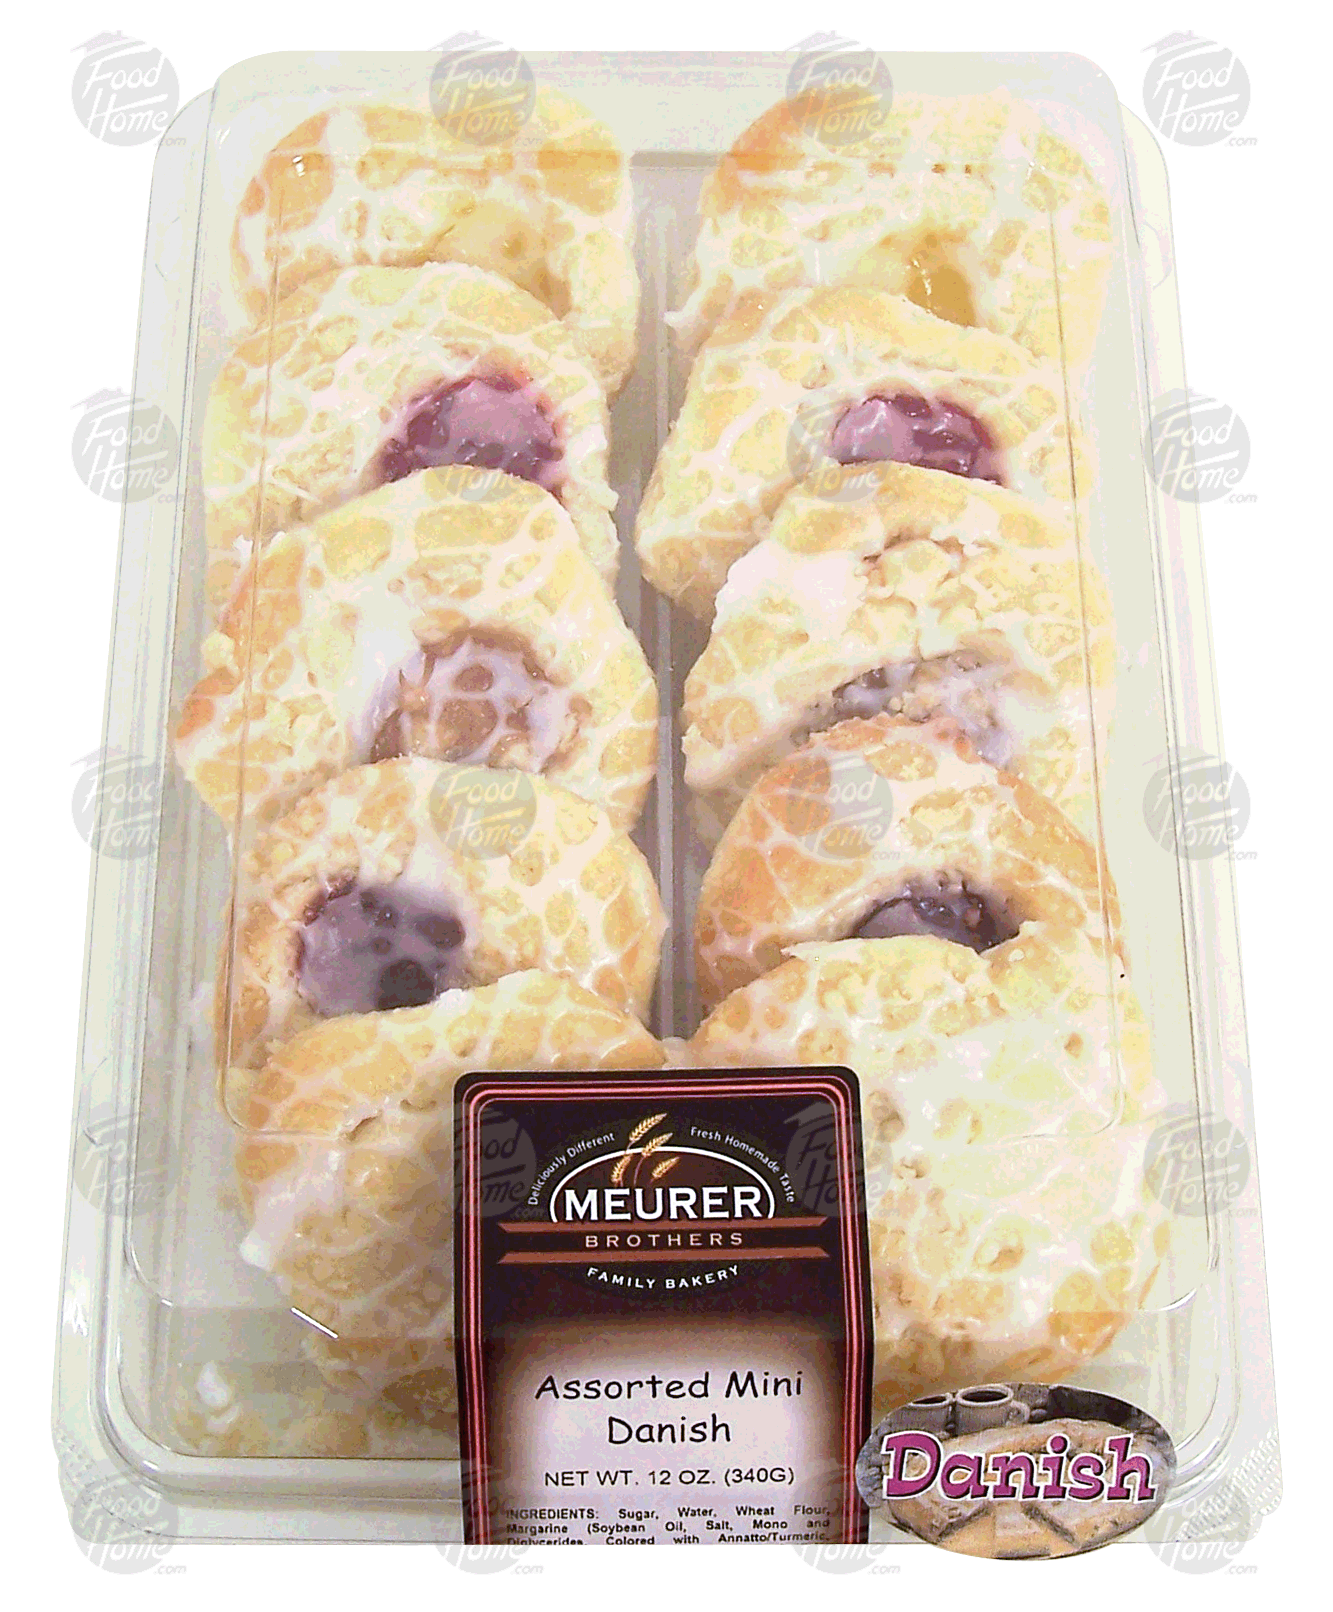 Meurer Brothers Bakery  assorted mini danish, 10 ct Full-Size Picture